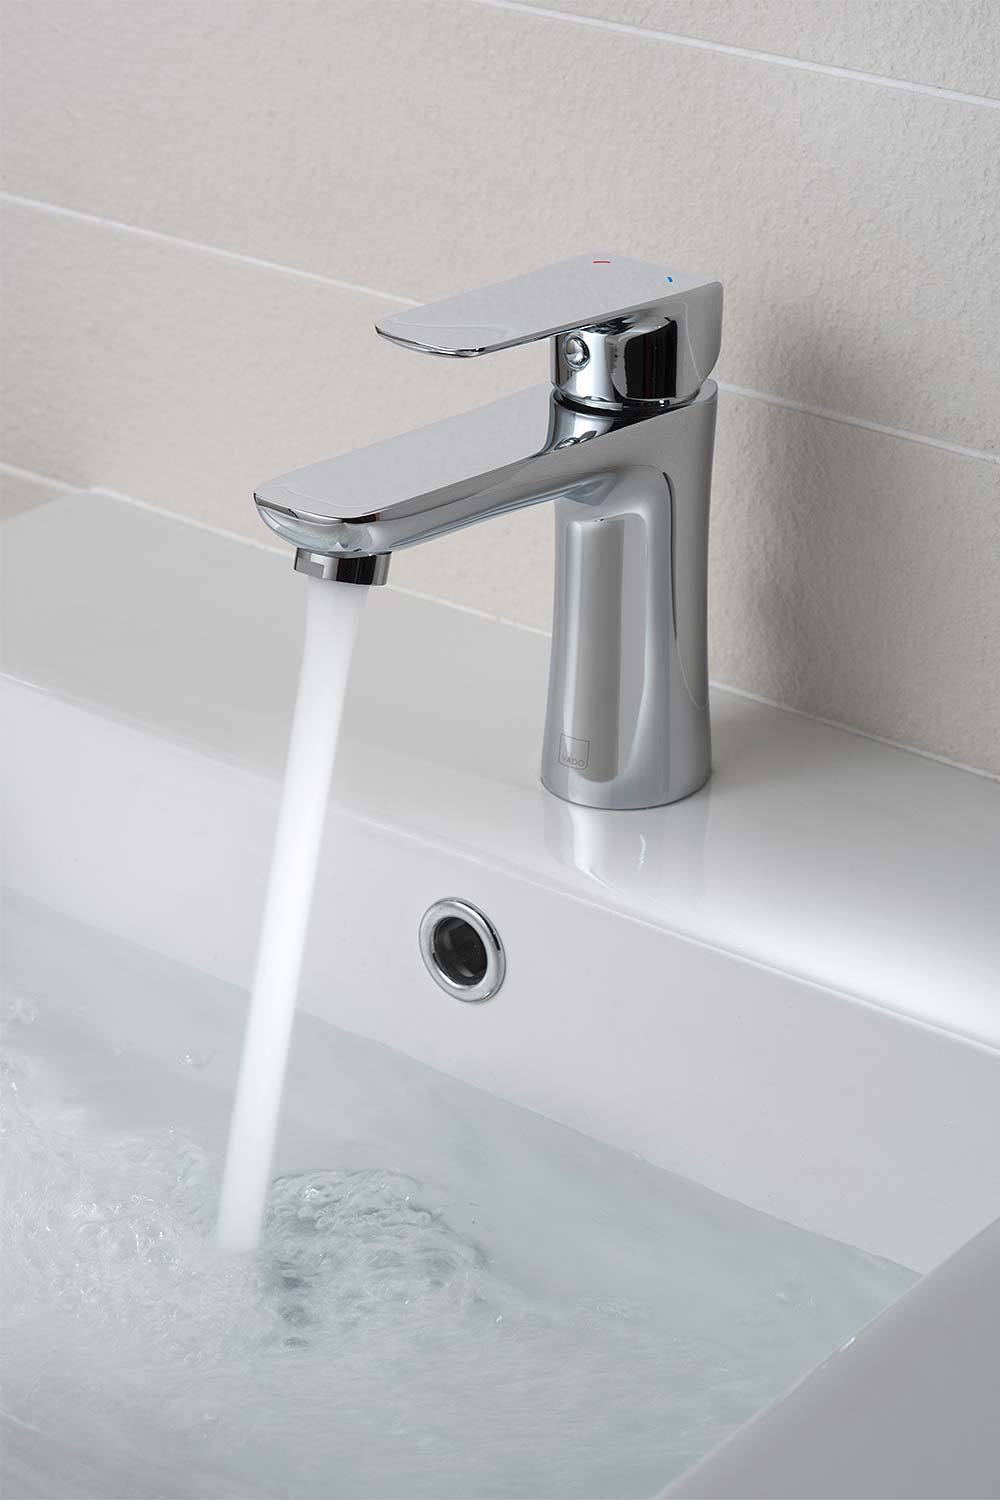 Single lever mono basin mixer with water on a white basin.